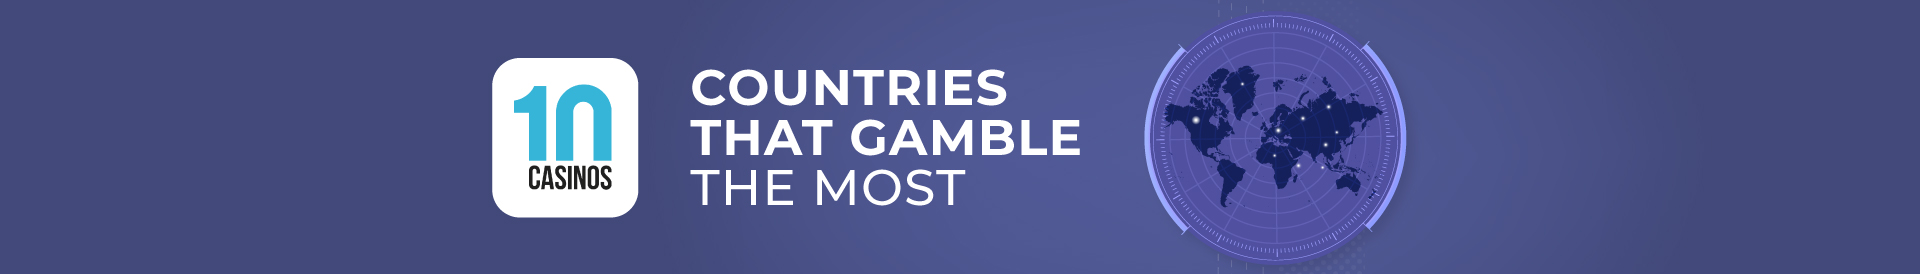 top 10 countries that gamble the most desktop